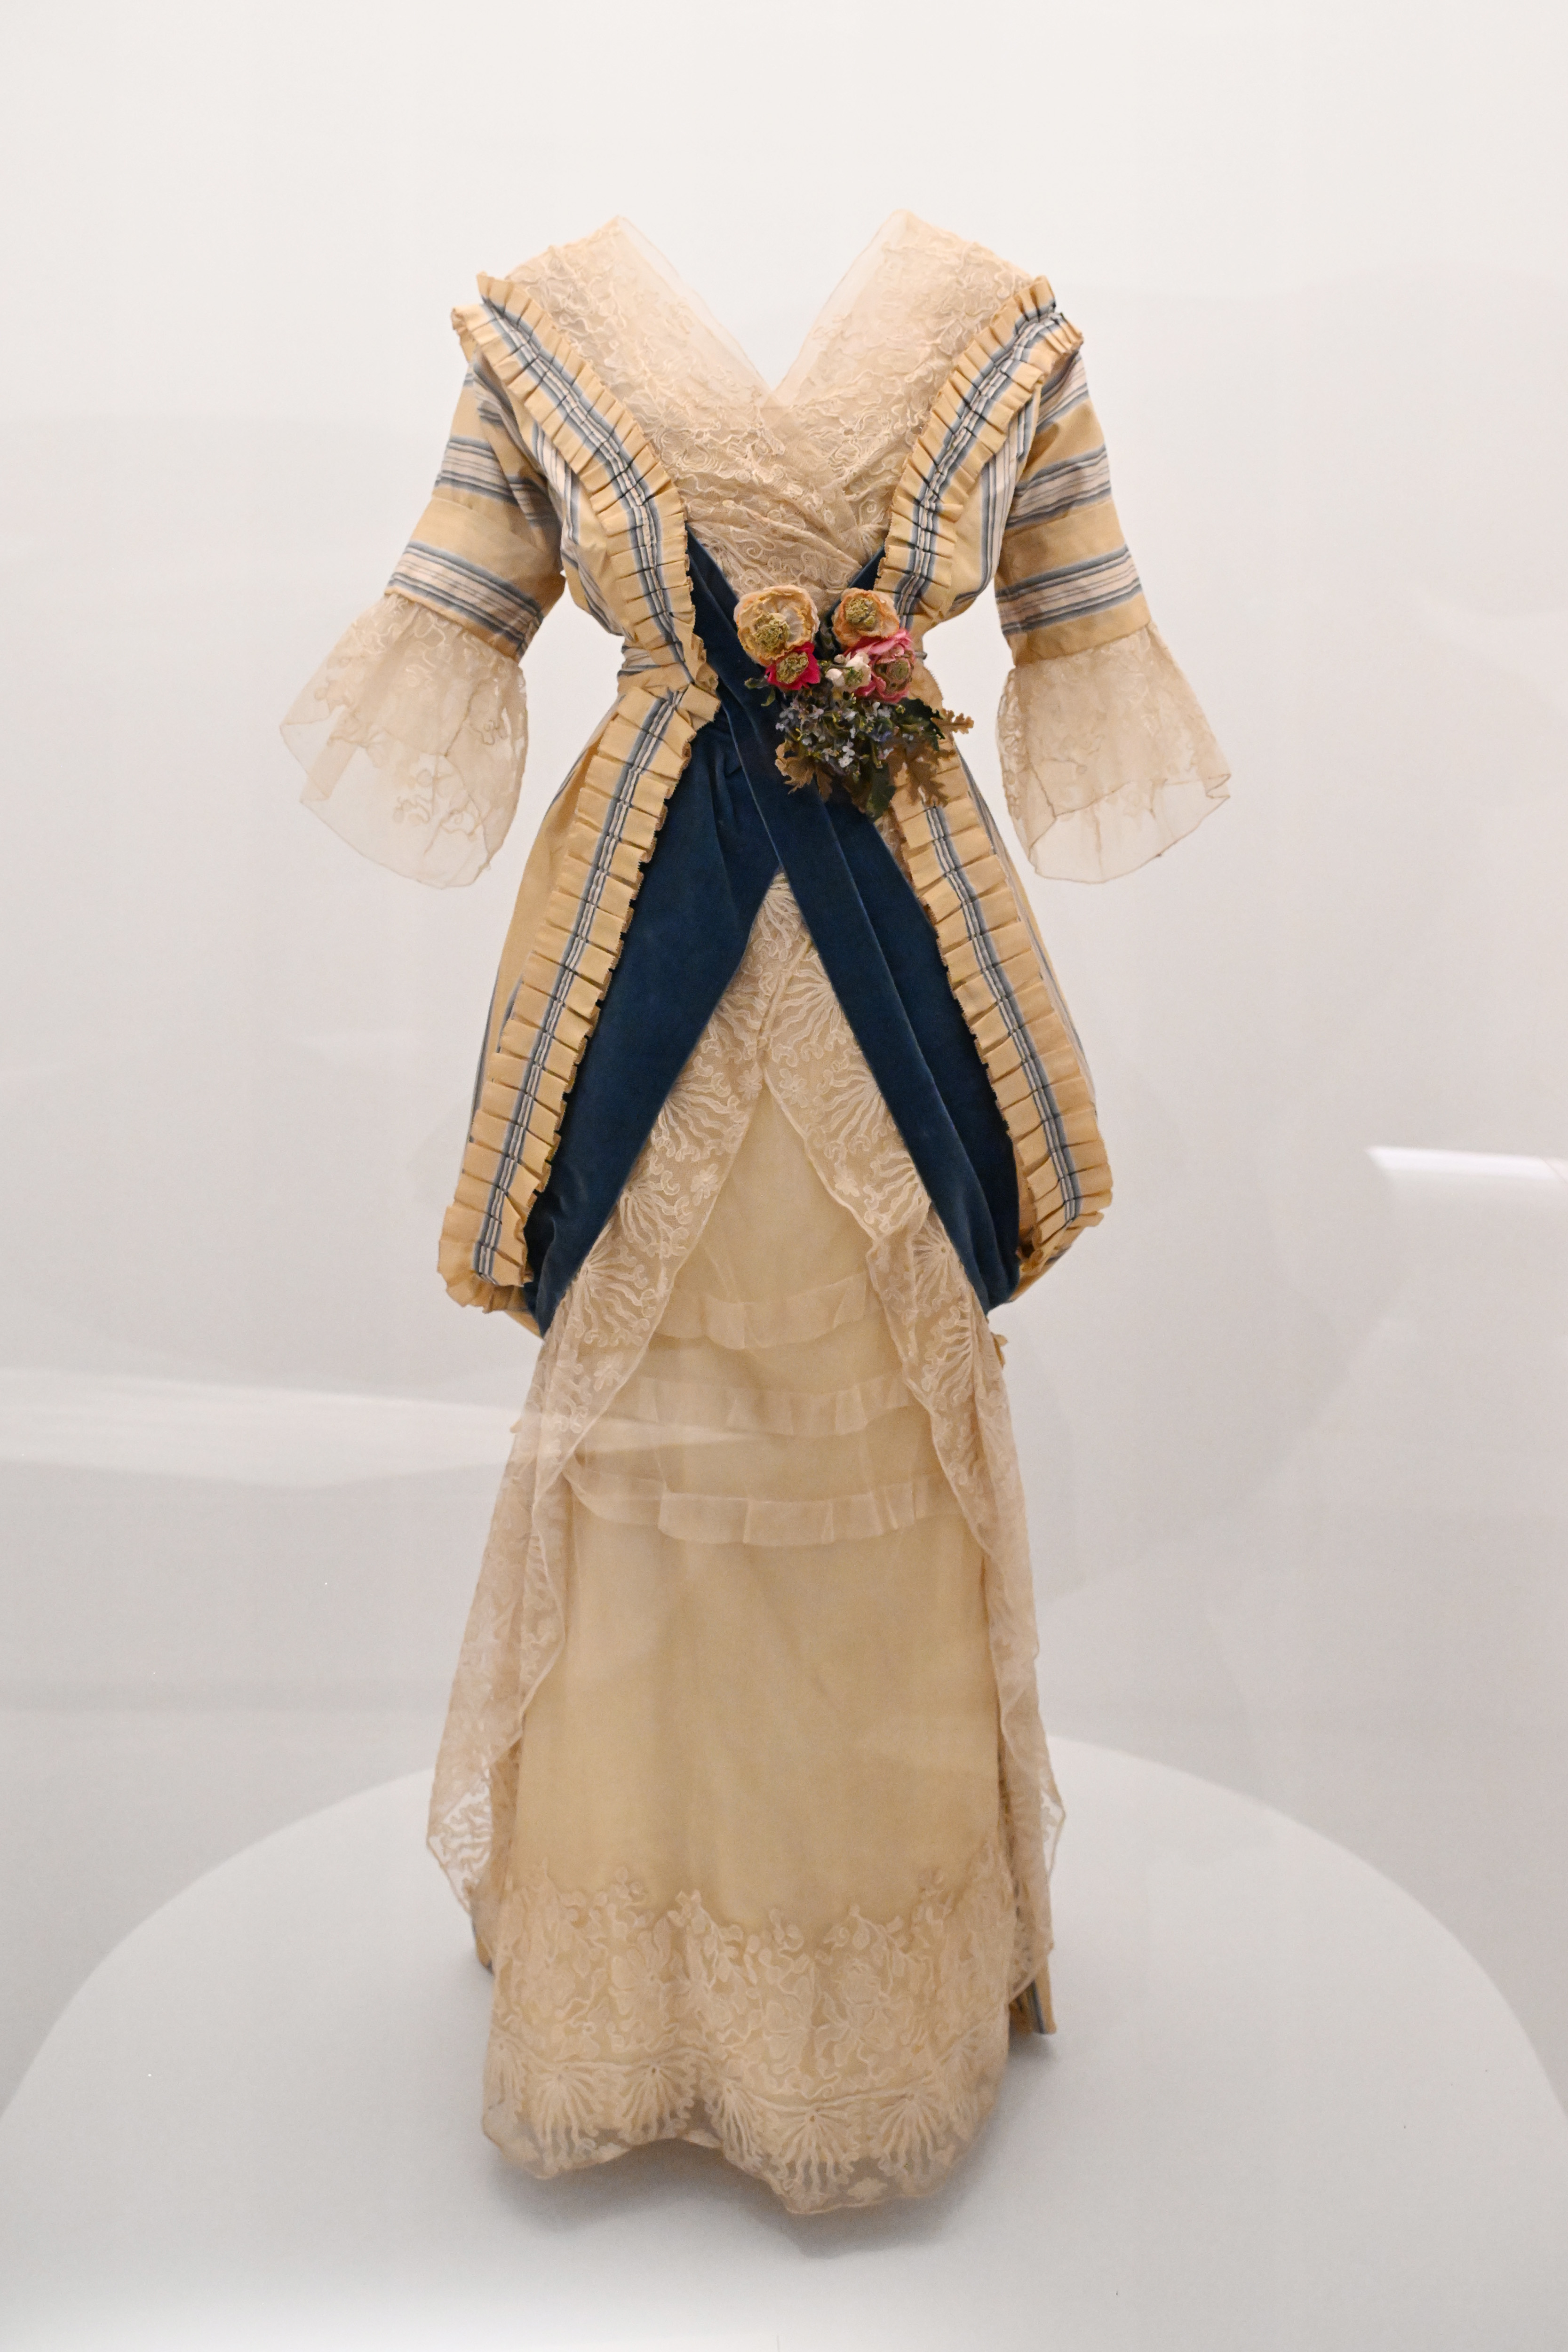 Vintage dress on display with lace details, striped accents, and a floral adornment